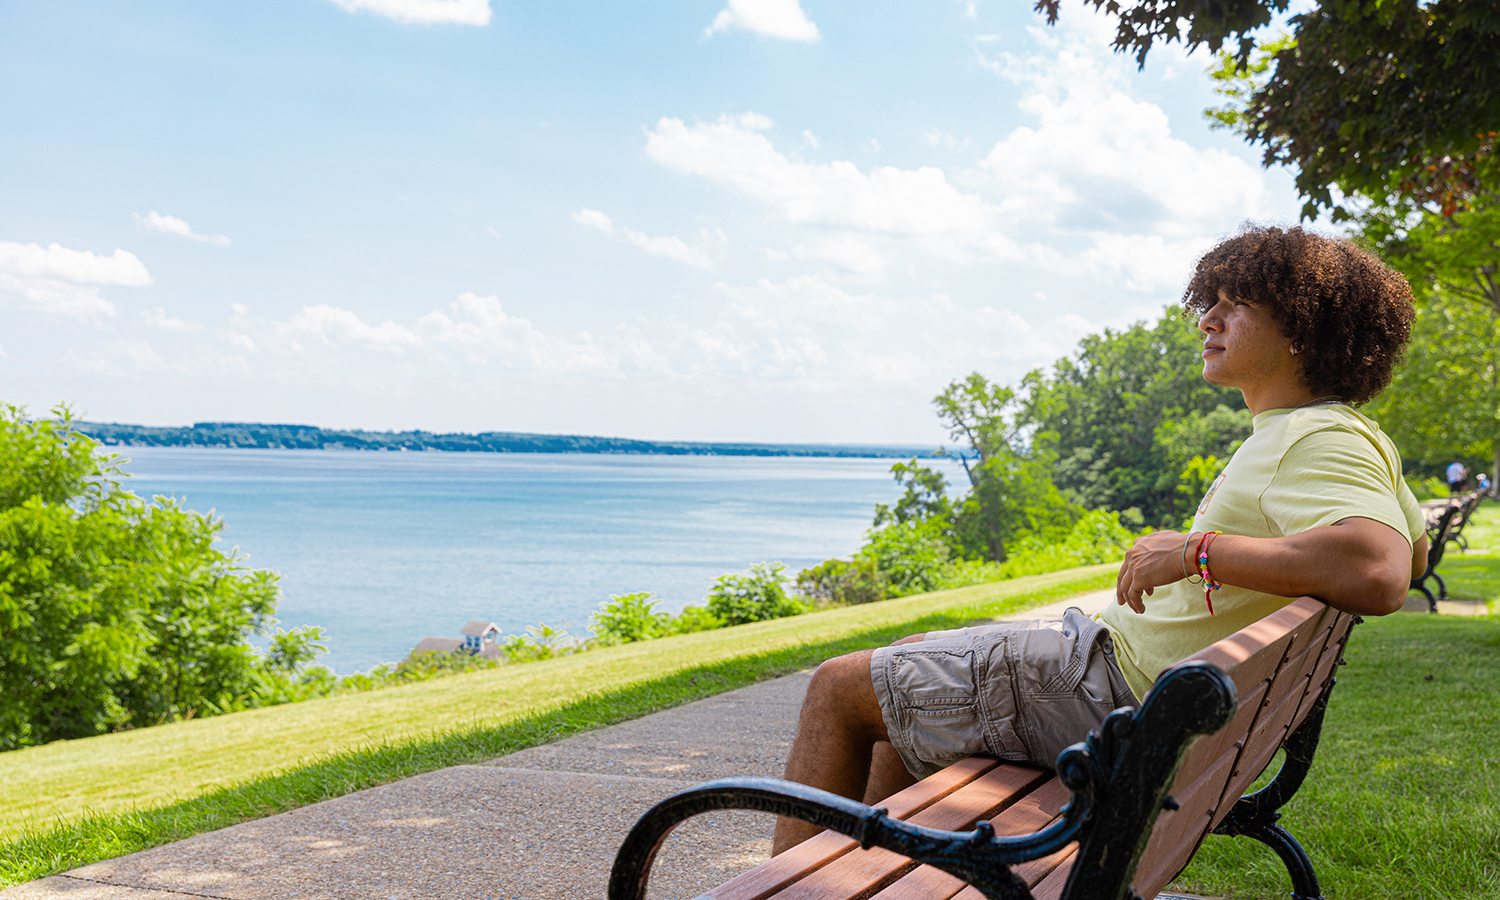 In This Week in Photos, we ask students to show us their favorite places on campus. Here, Elliott Menzies '24 relaxes on the South Main Street benches overlooking Seneca Lake.